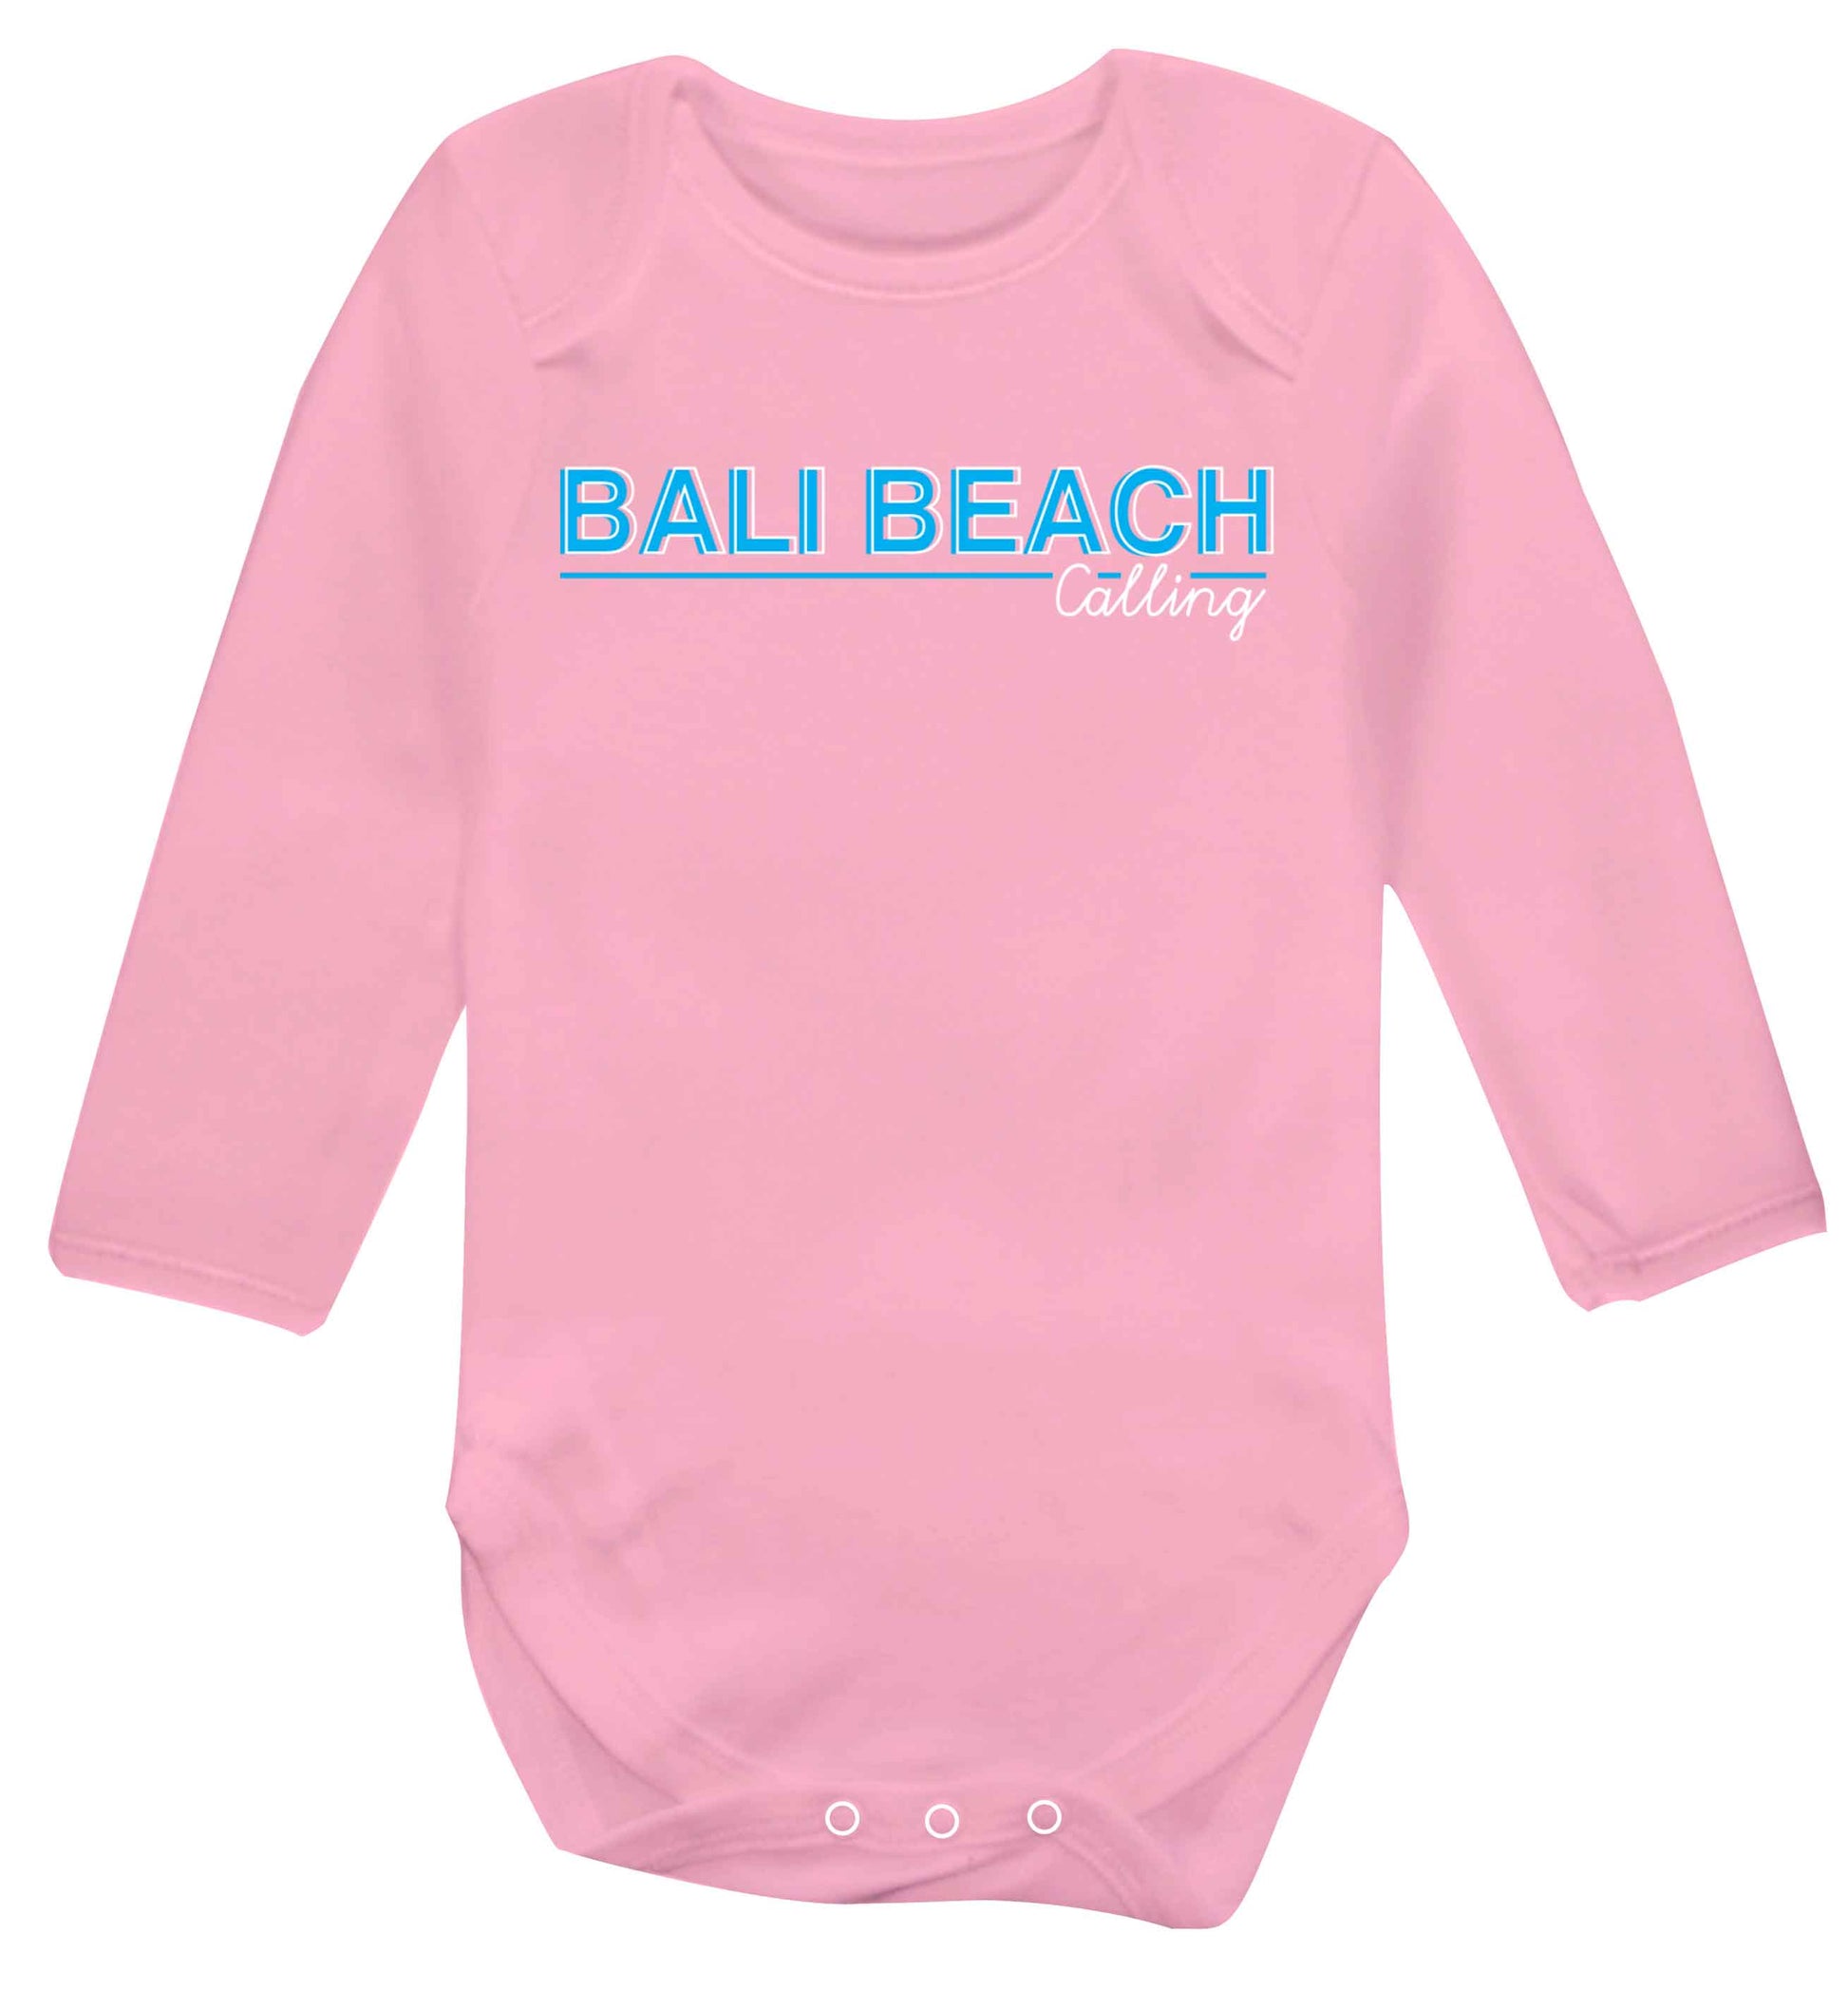 Bali beach calling Baby Vest long sleeved pale pink 6-12 months